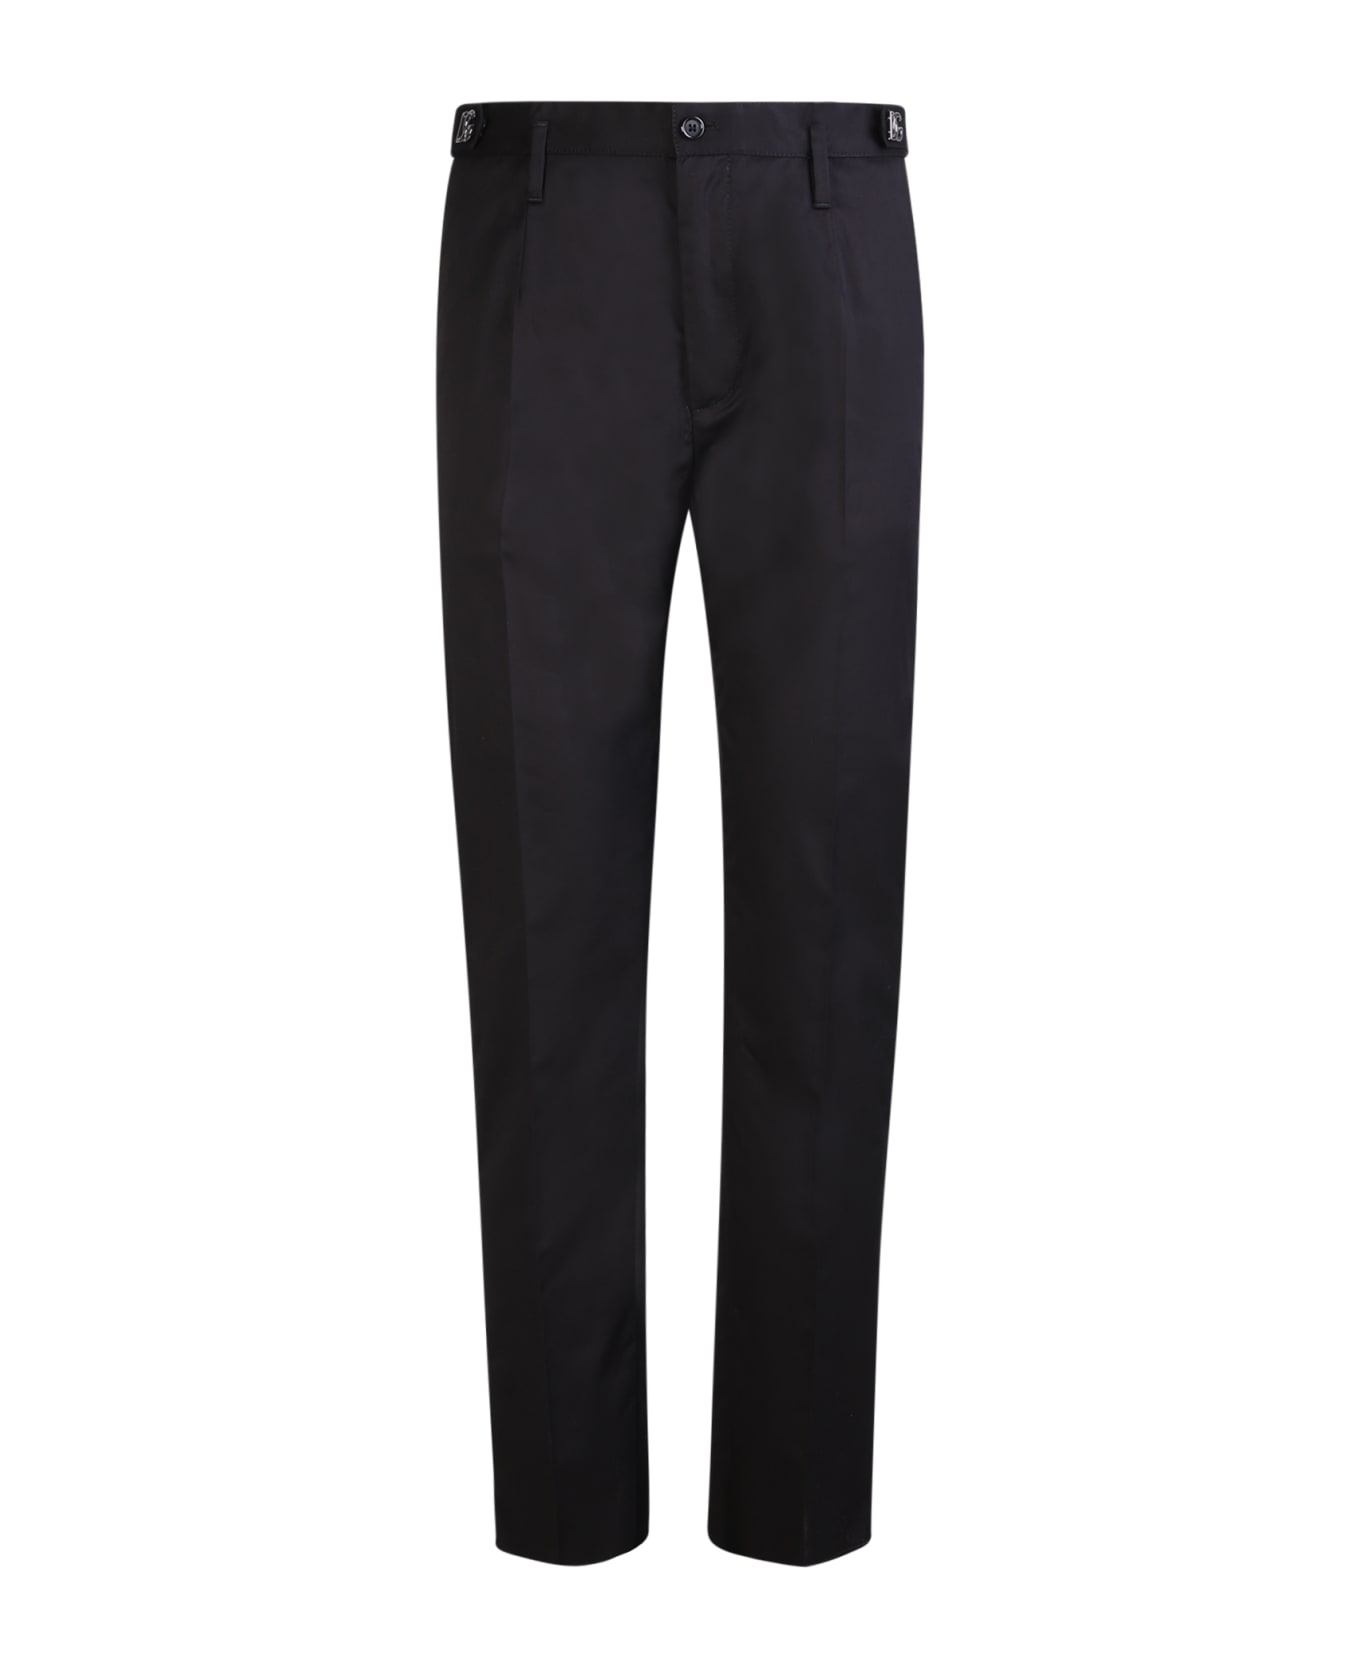 Dolce & Gabbana Tailored Trousers - Black ボトムス